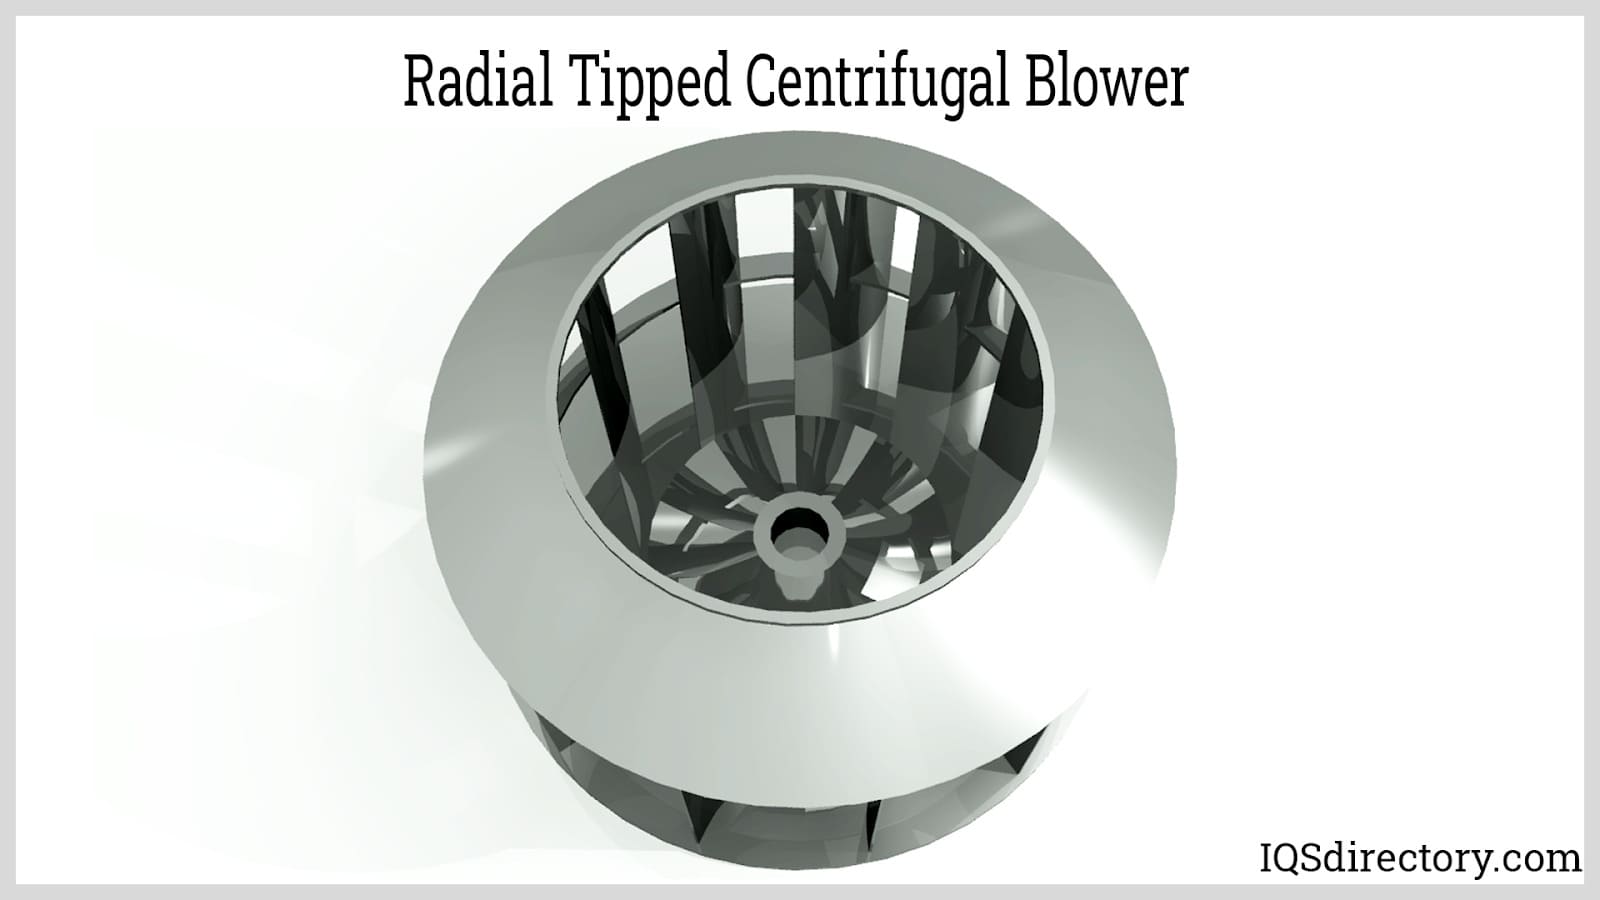 Radial Tipped Centrifugal Blower